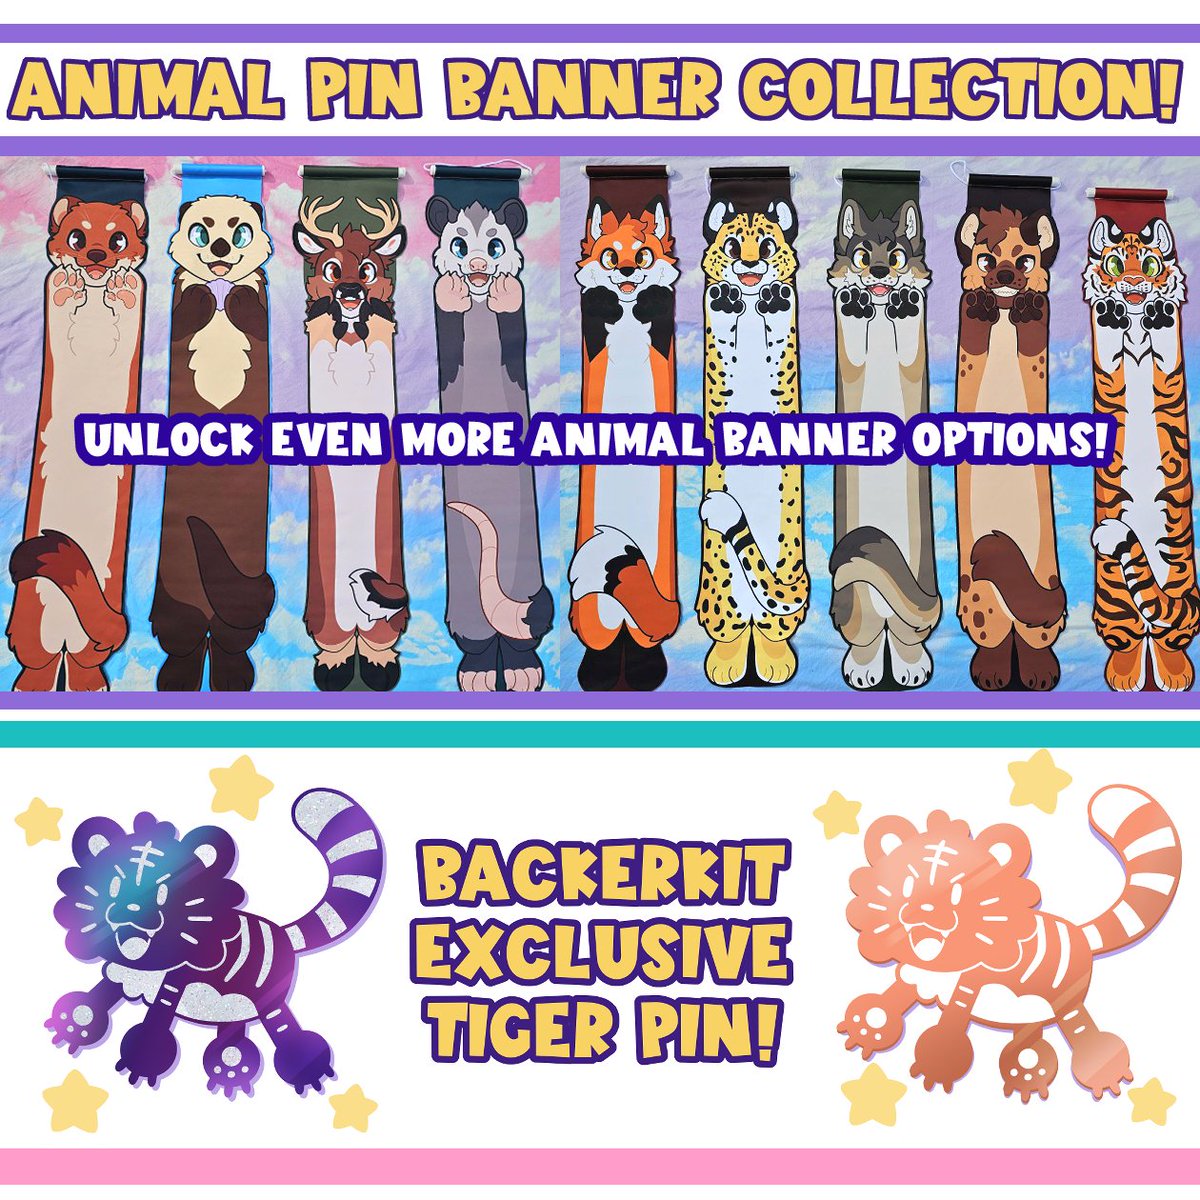 🐾 The Animal Pin Banner Collection project on Backerkit is LIVE! ➡️ backerkit.com/c/projects/scr… 🌈Remember to pledge within the first 48 hours to receive a free rainbow tiger pin! 🐯